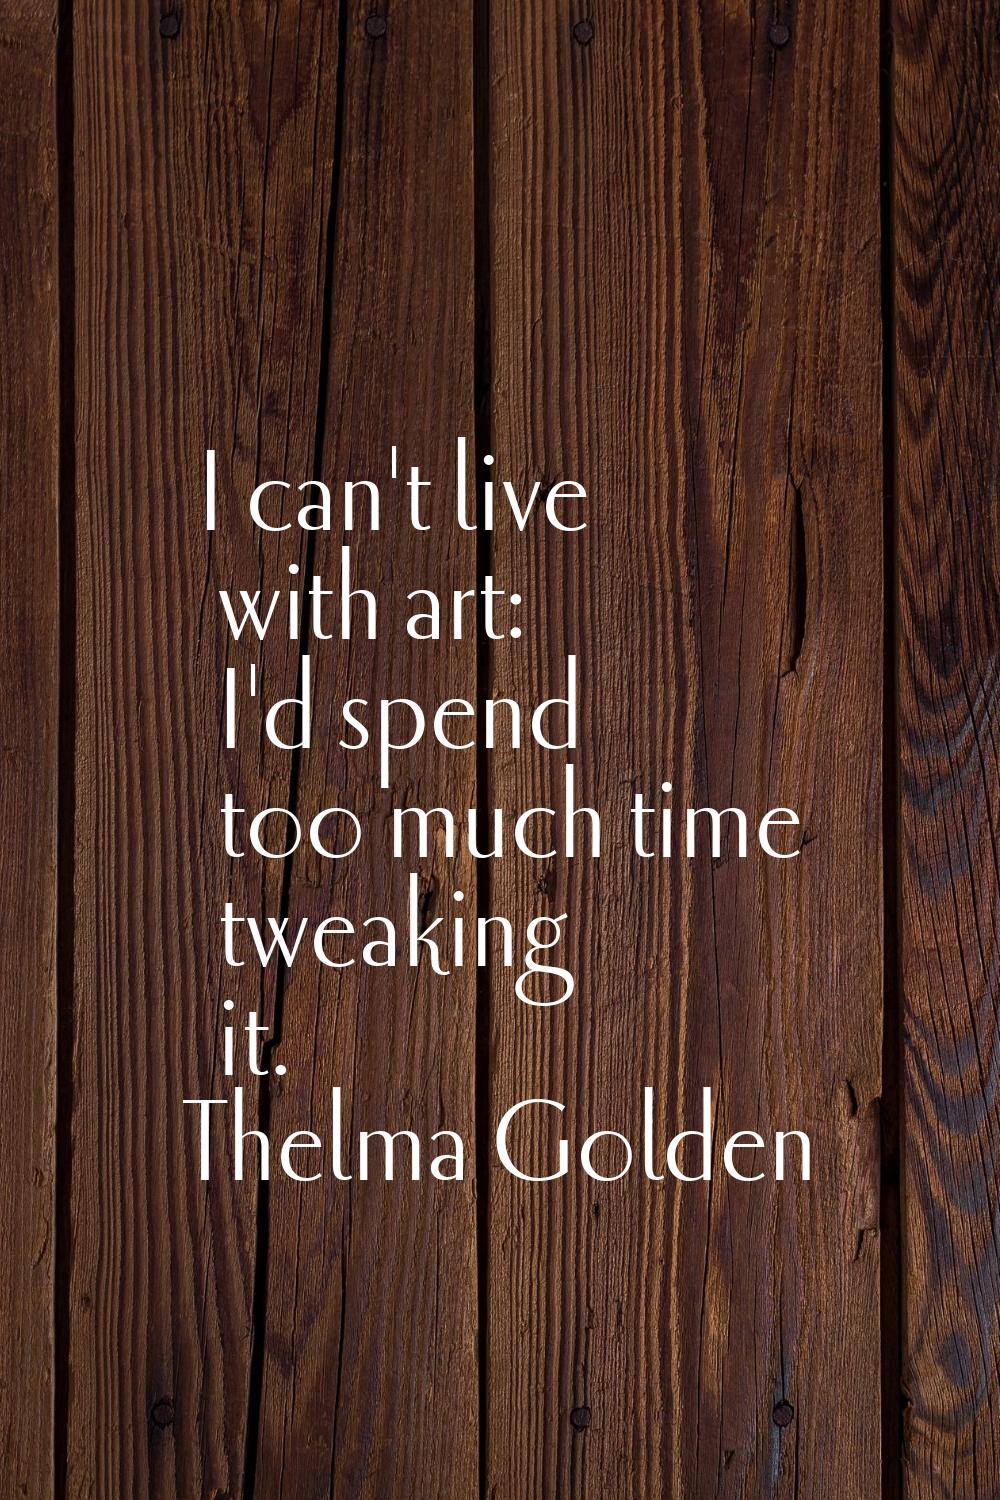 I can't live with art: I'd spend too much time tweaking it.